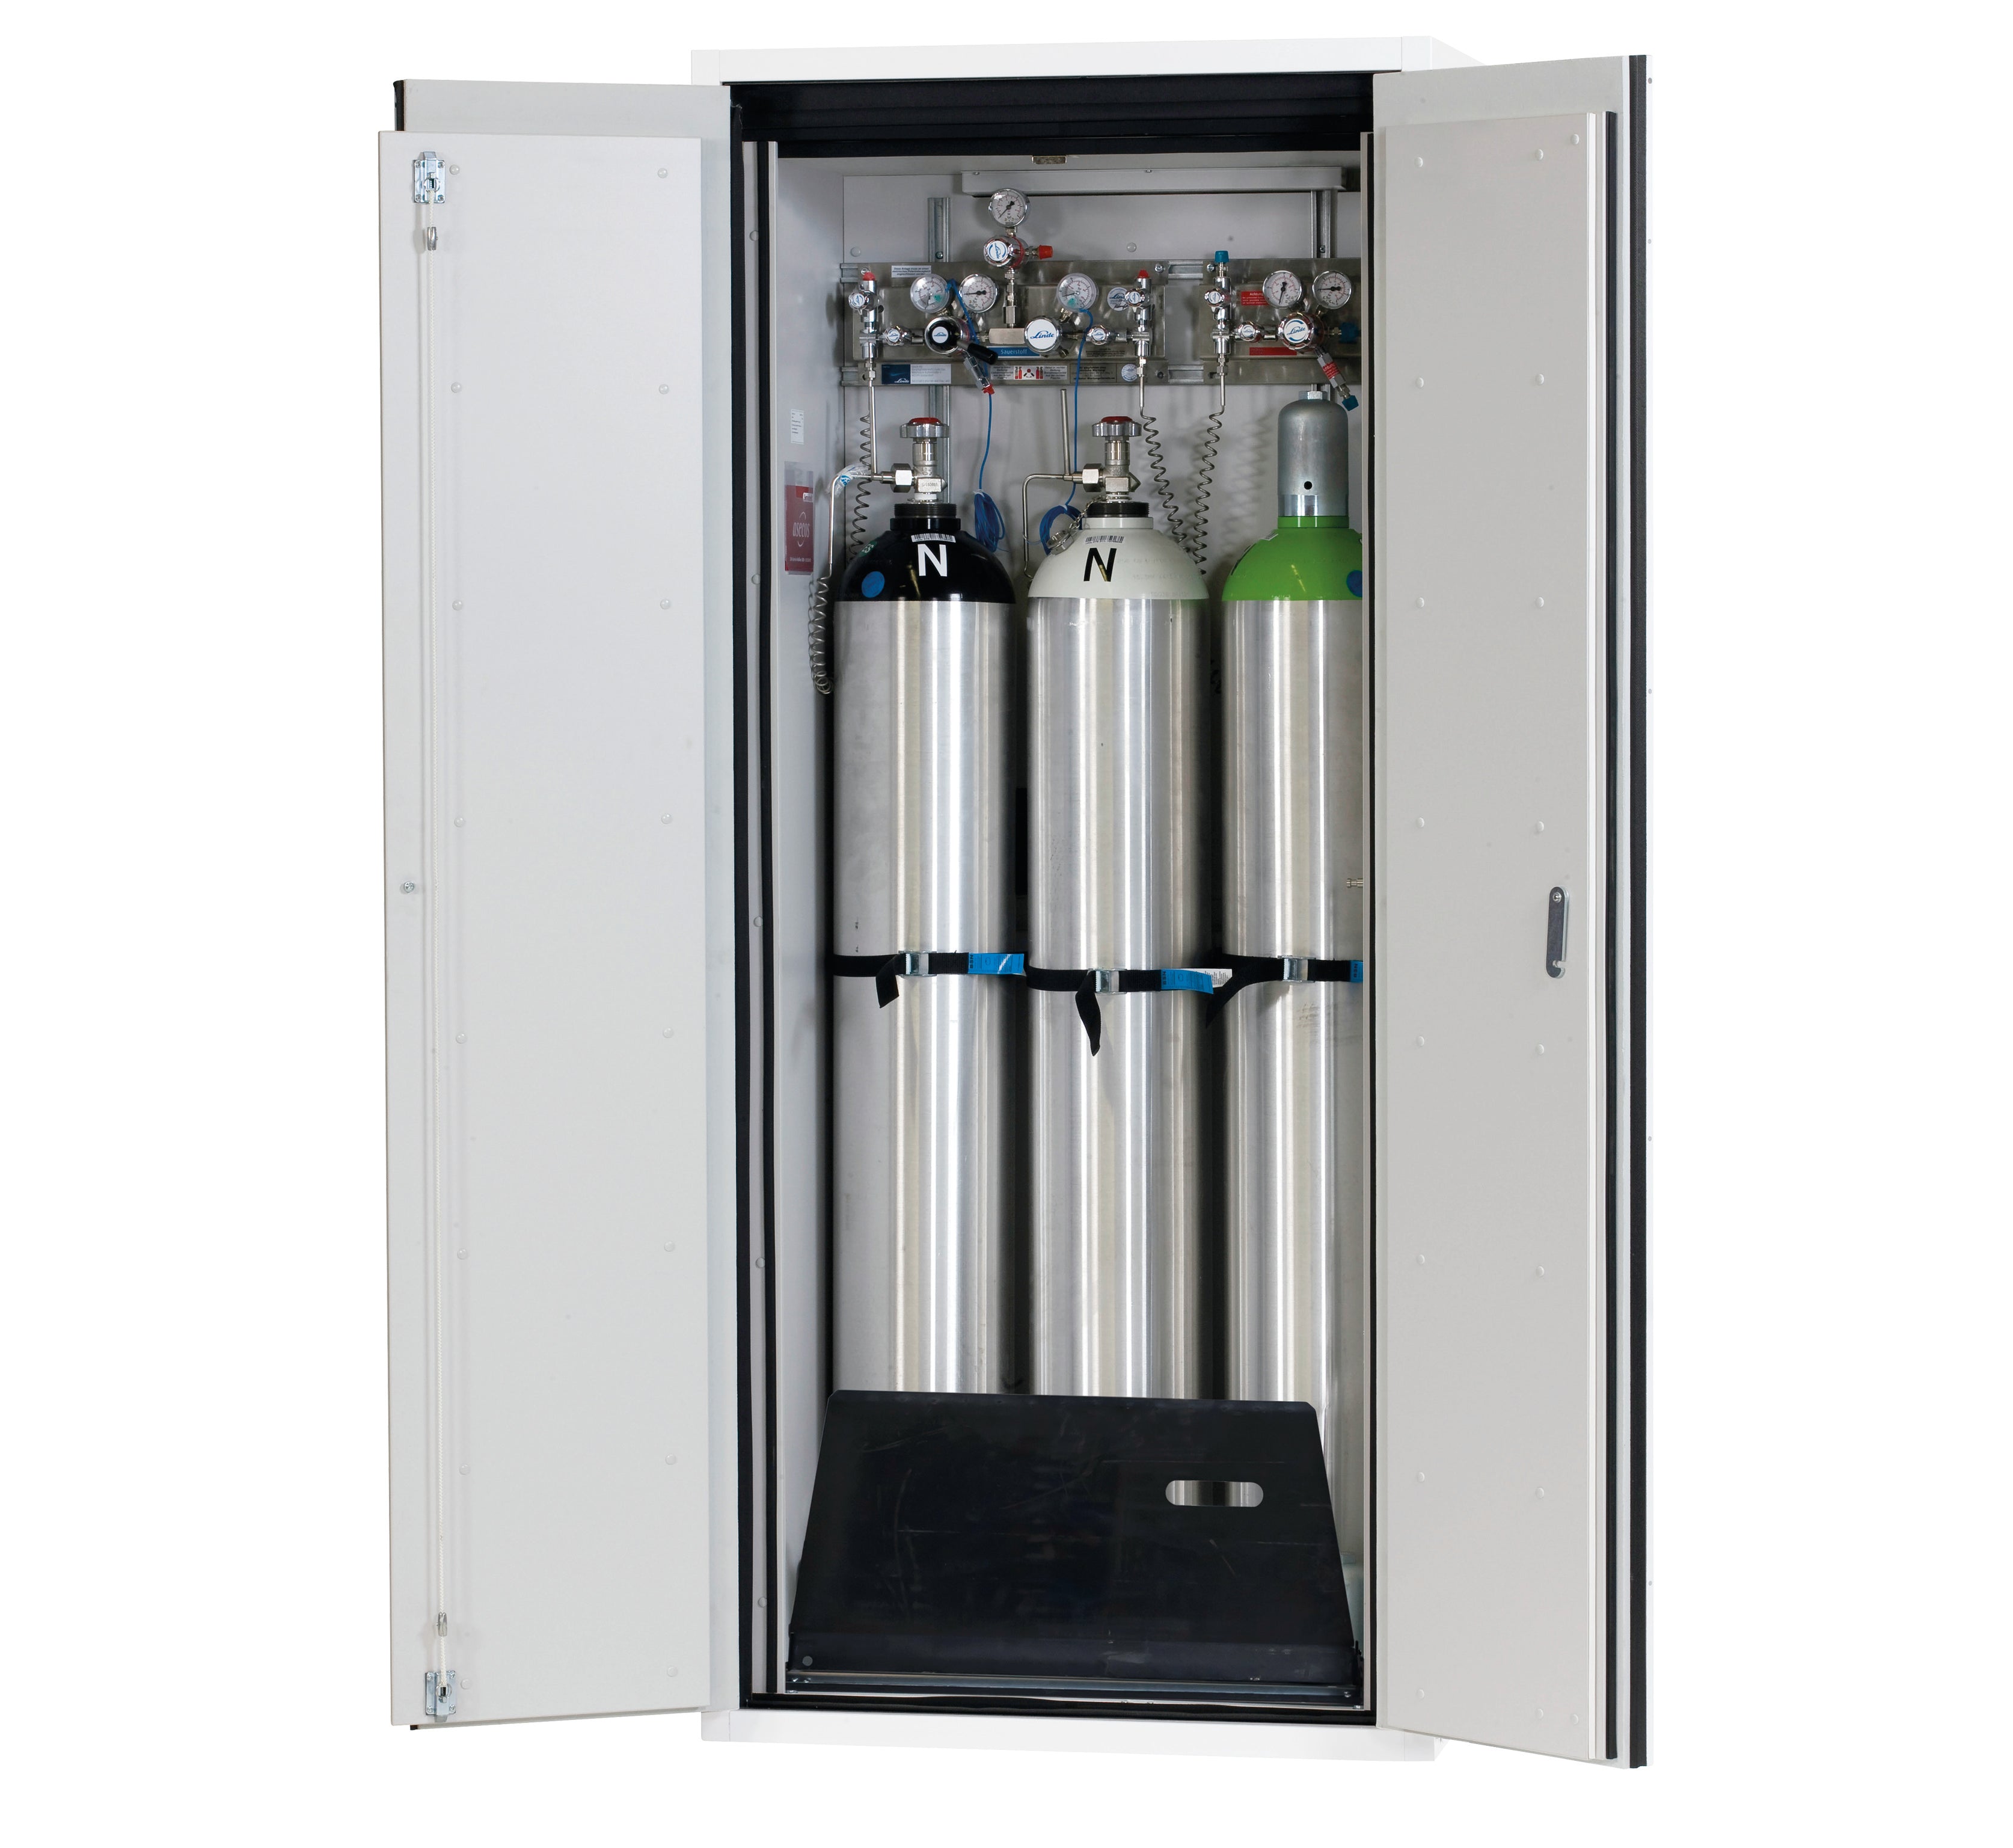 Type 90 compressed gas bottle cabinet G-ULTIMATE-90 model G90.205.090 in laboratory white (similar to RAL 9016) with standard interior fittings for 3x compressed gas bottles of 50 liters each